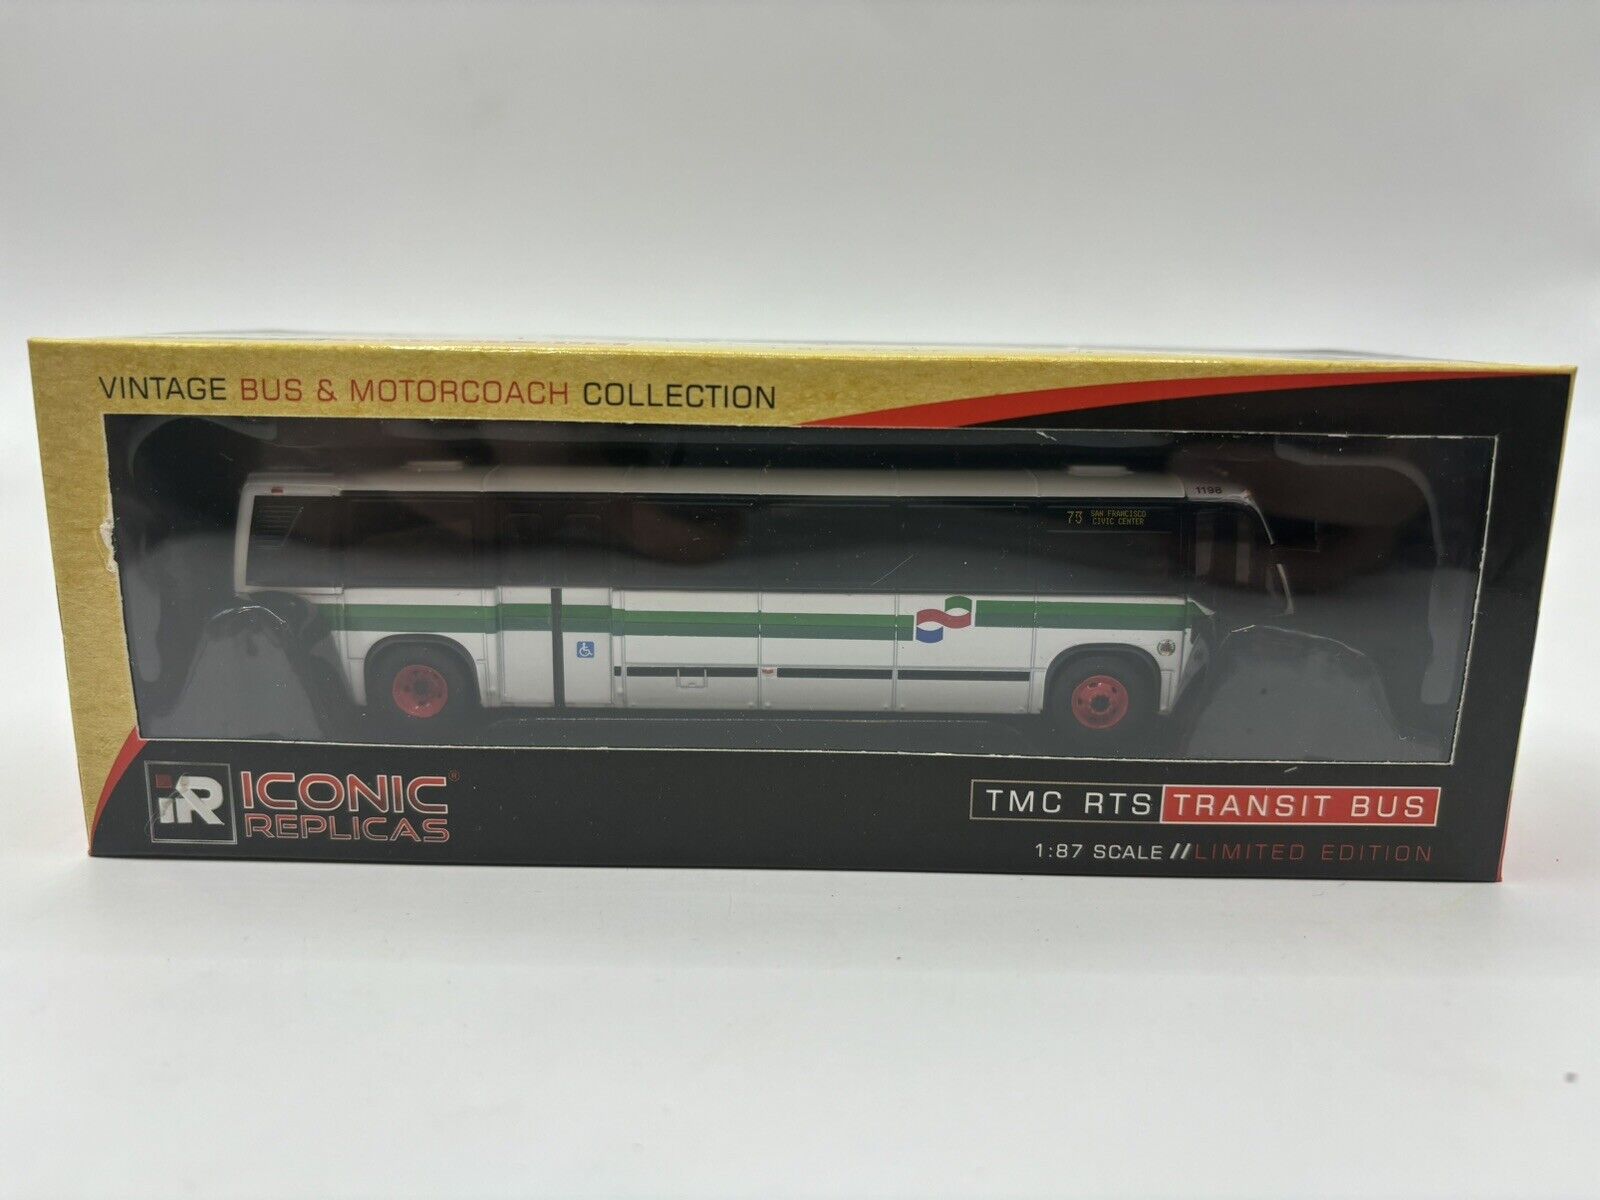 ICONIC REPLICAS TMC RTS TRANSIT BUS 1:87 LIMITED EDITION